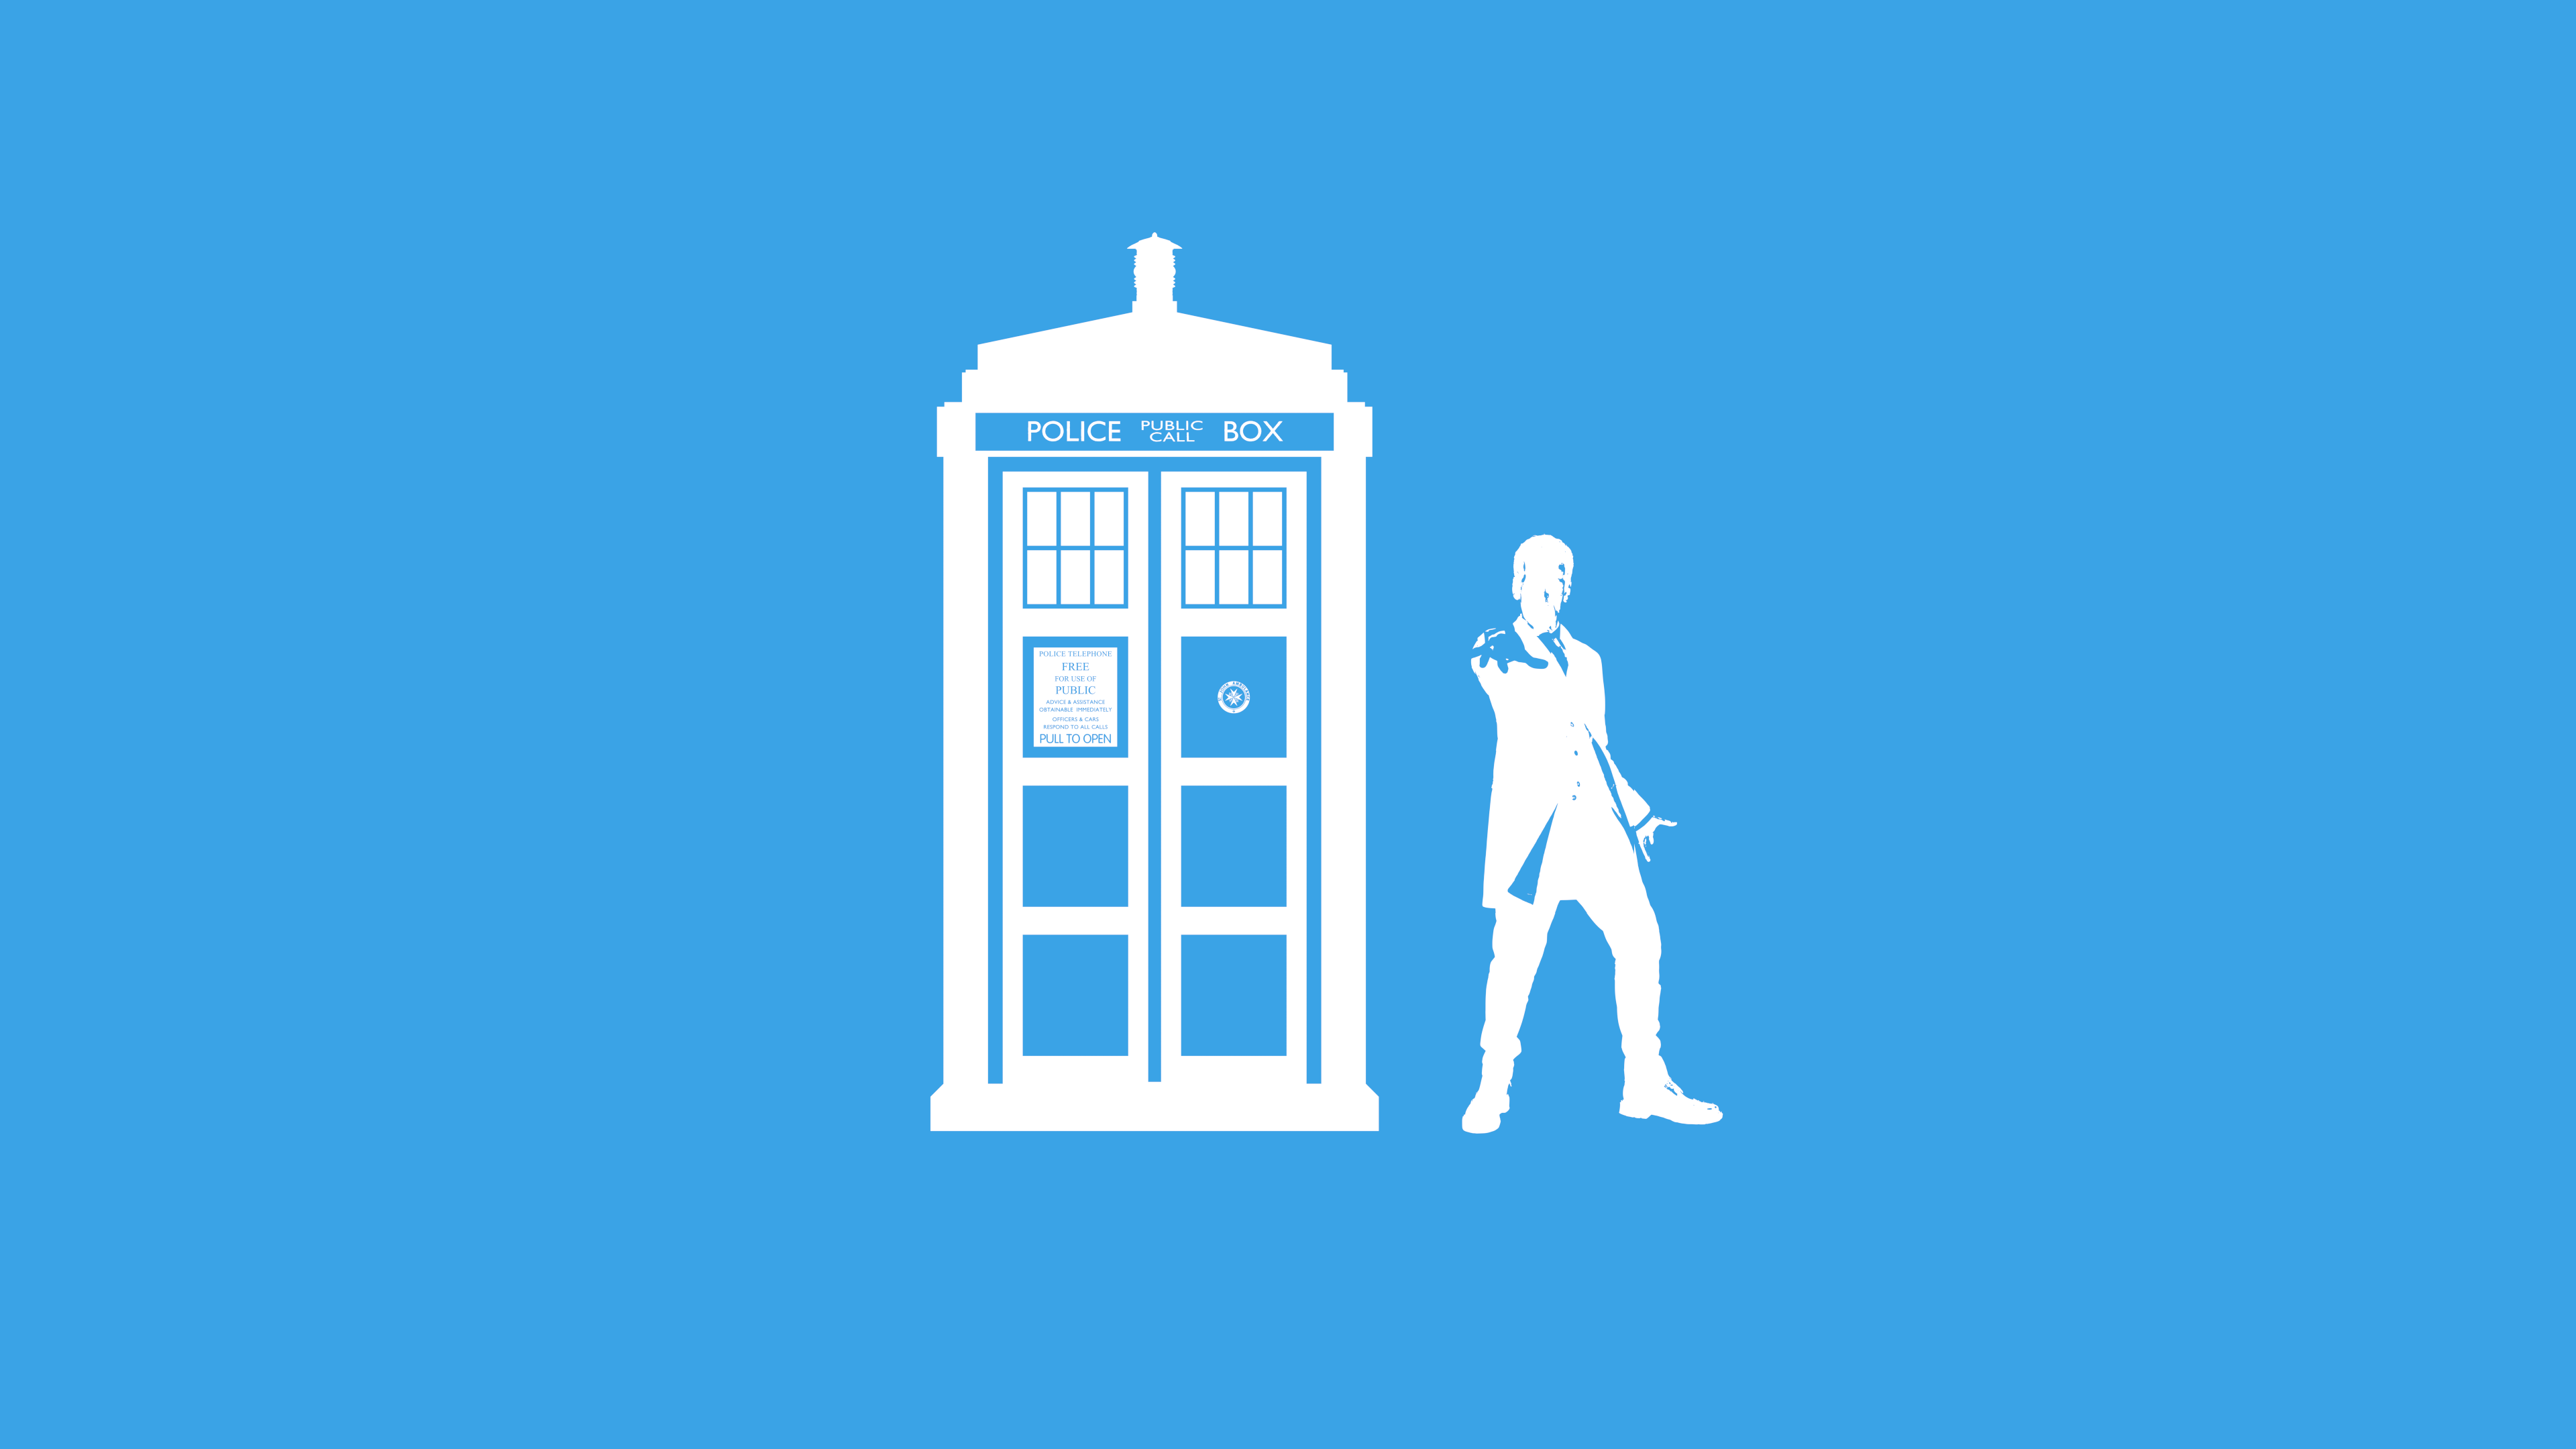 Doctor Who Tv Series Minimalism Wallpapers